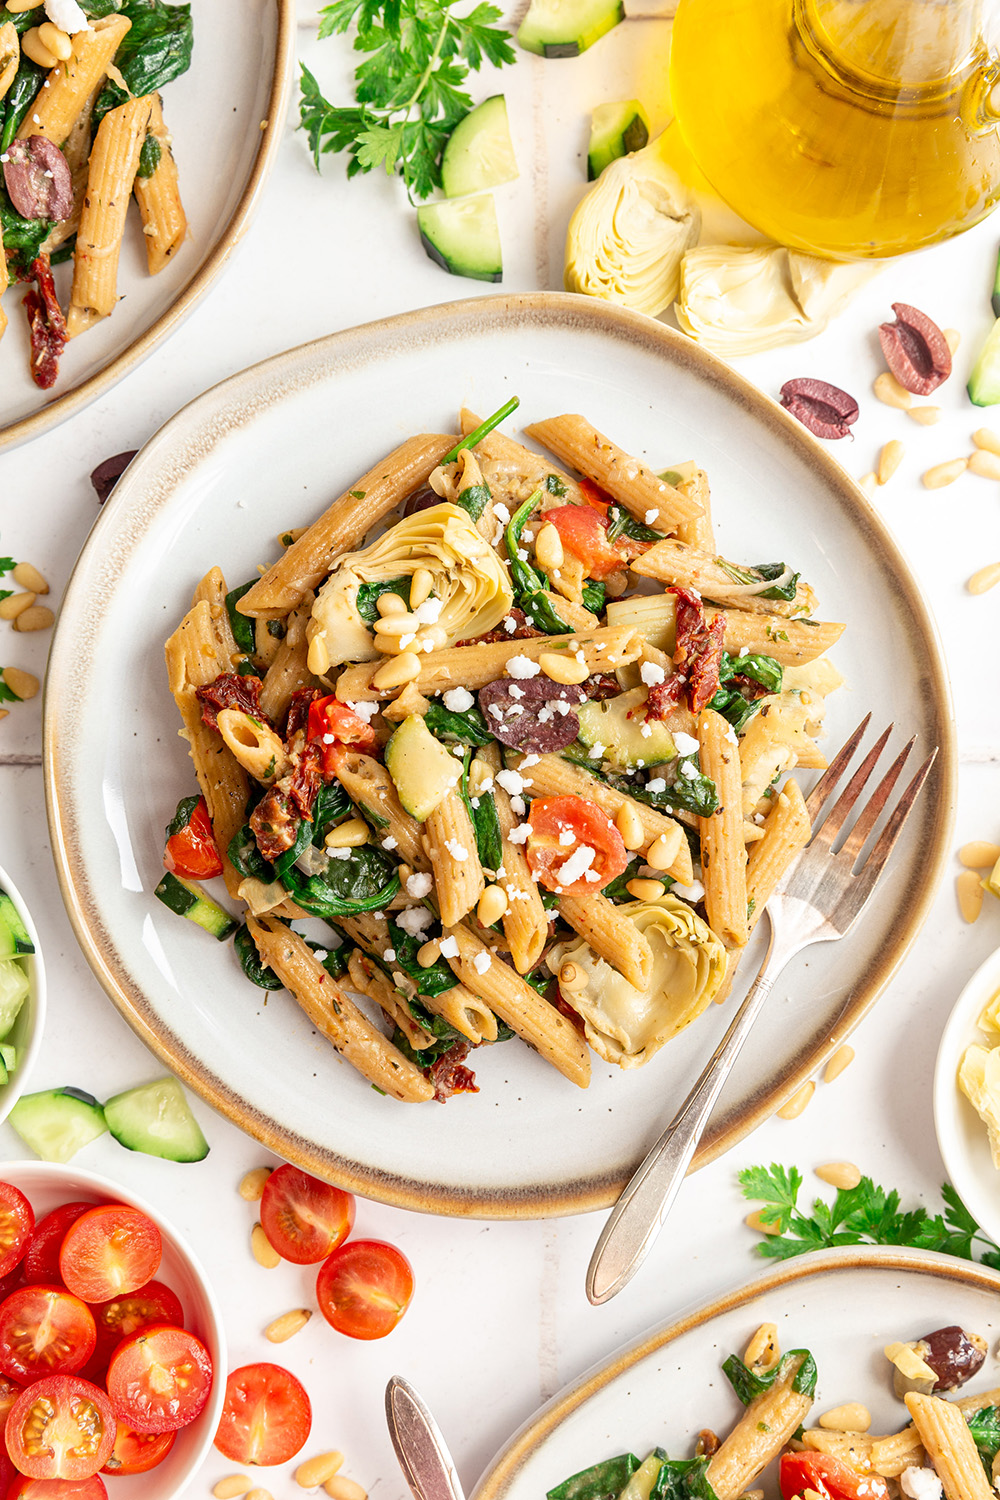 Gluten-Free Greek Pasta full of spinach, artichokes, tomatoes, and olives